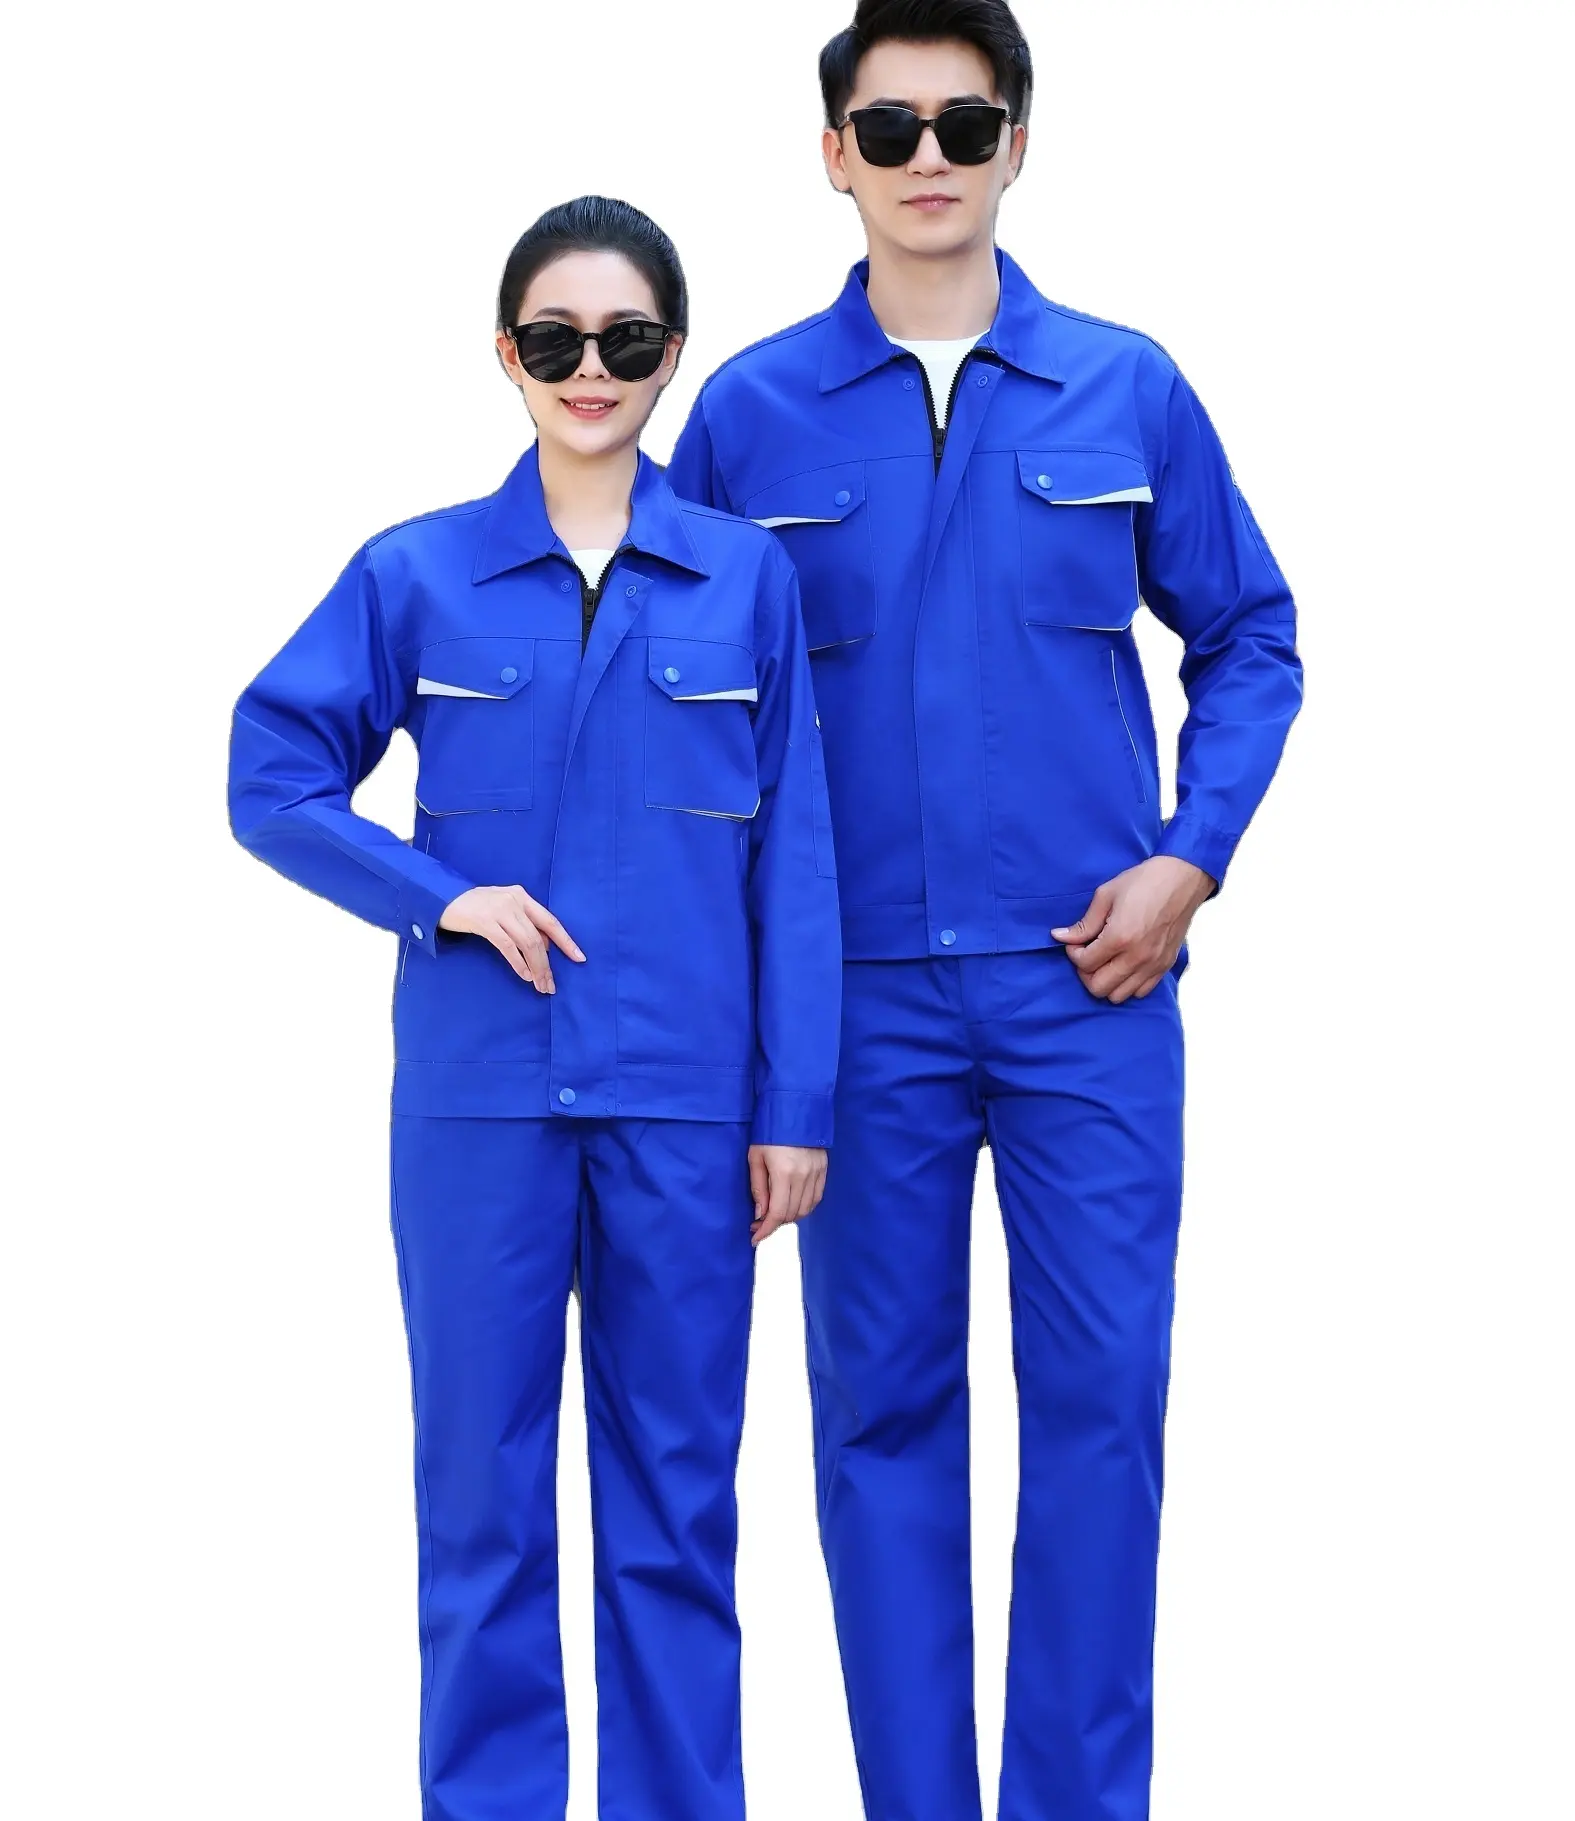 Cotton polyester workwear clothing workers work uniform